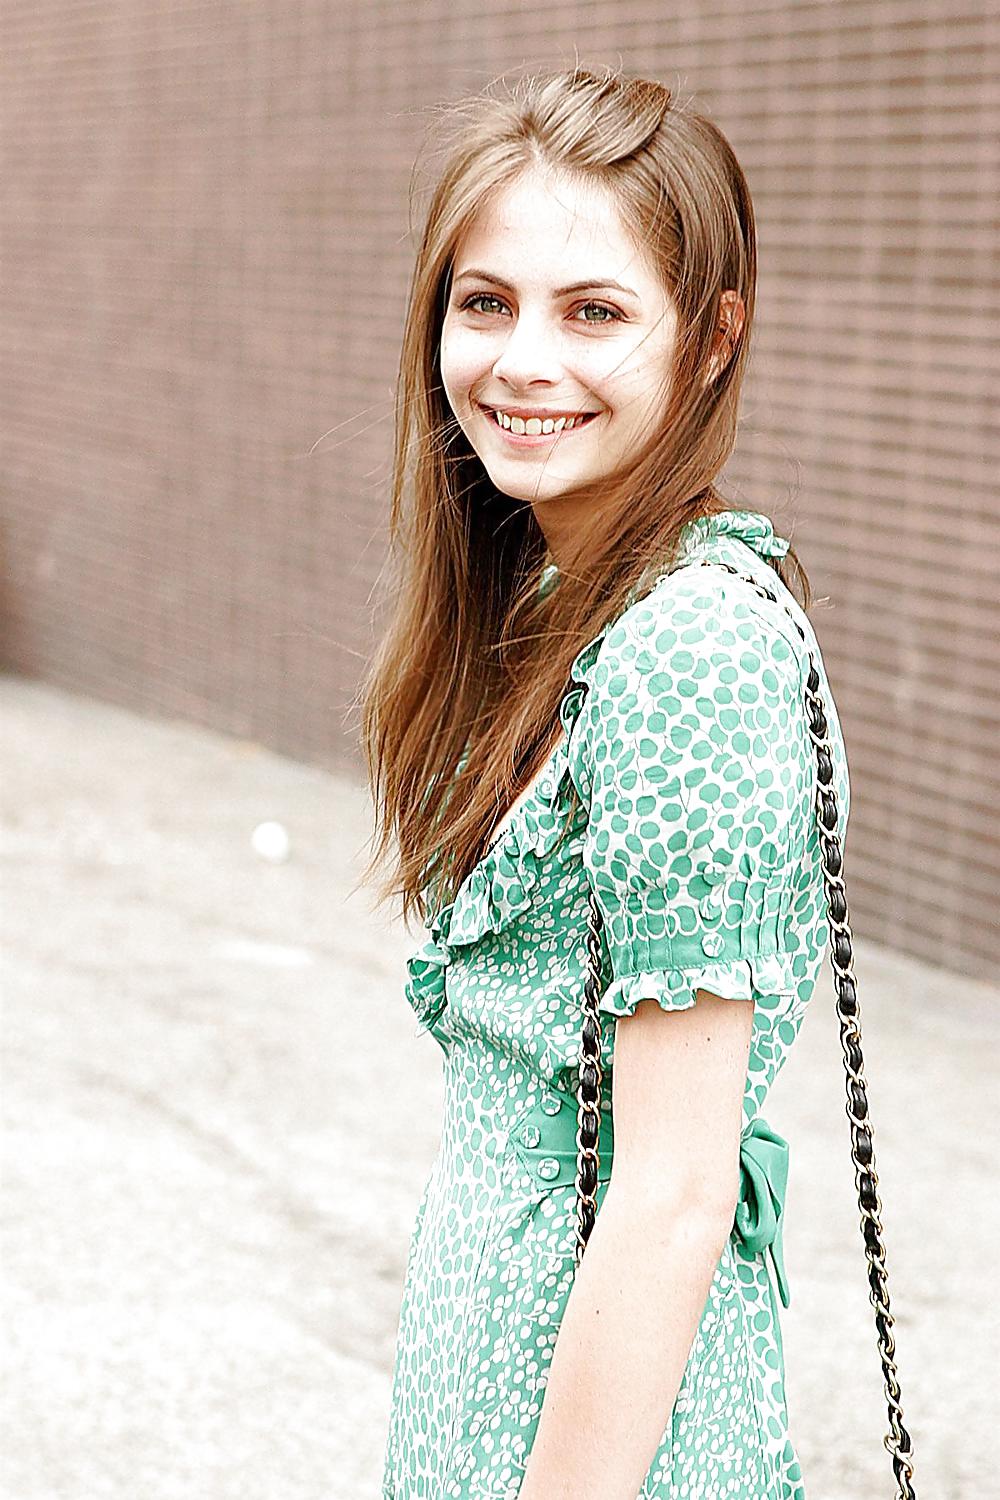 Willa holland (Hottest Young Celebrity) for fan :)  #15420325